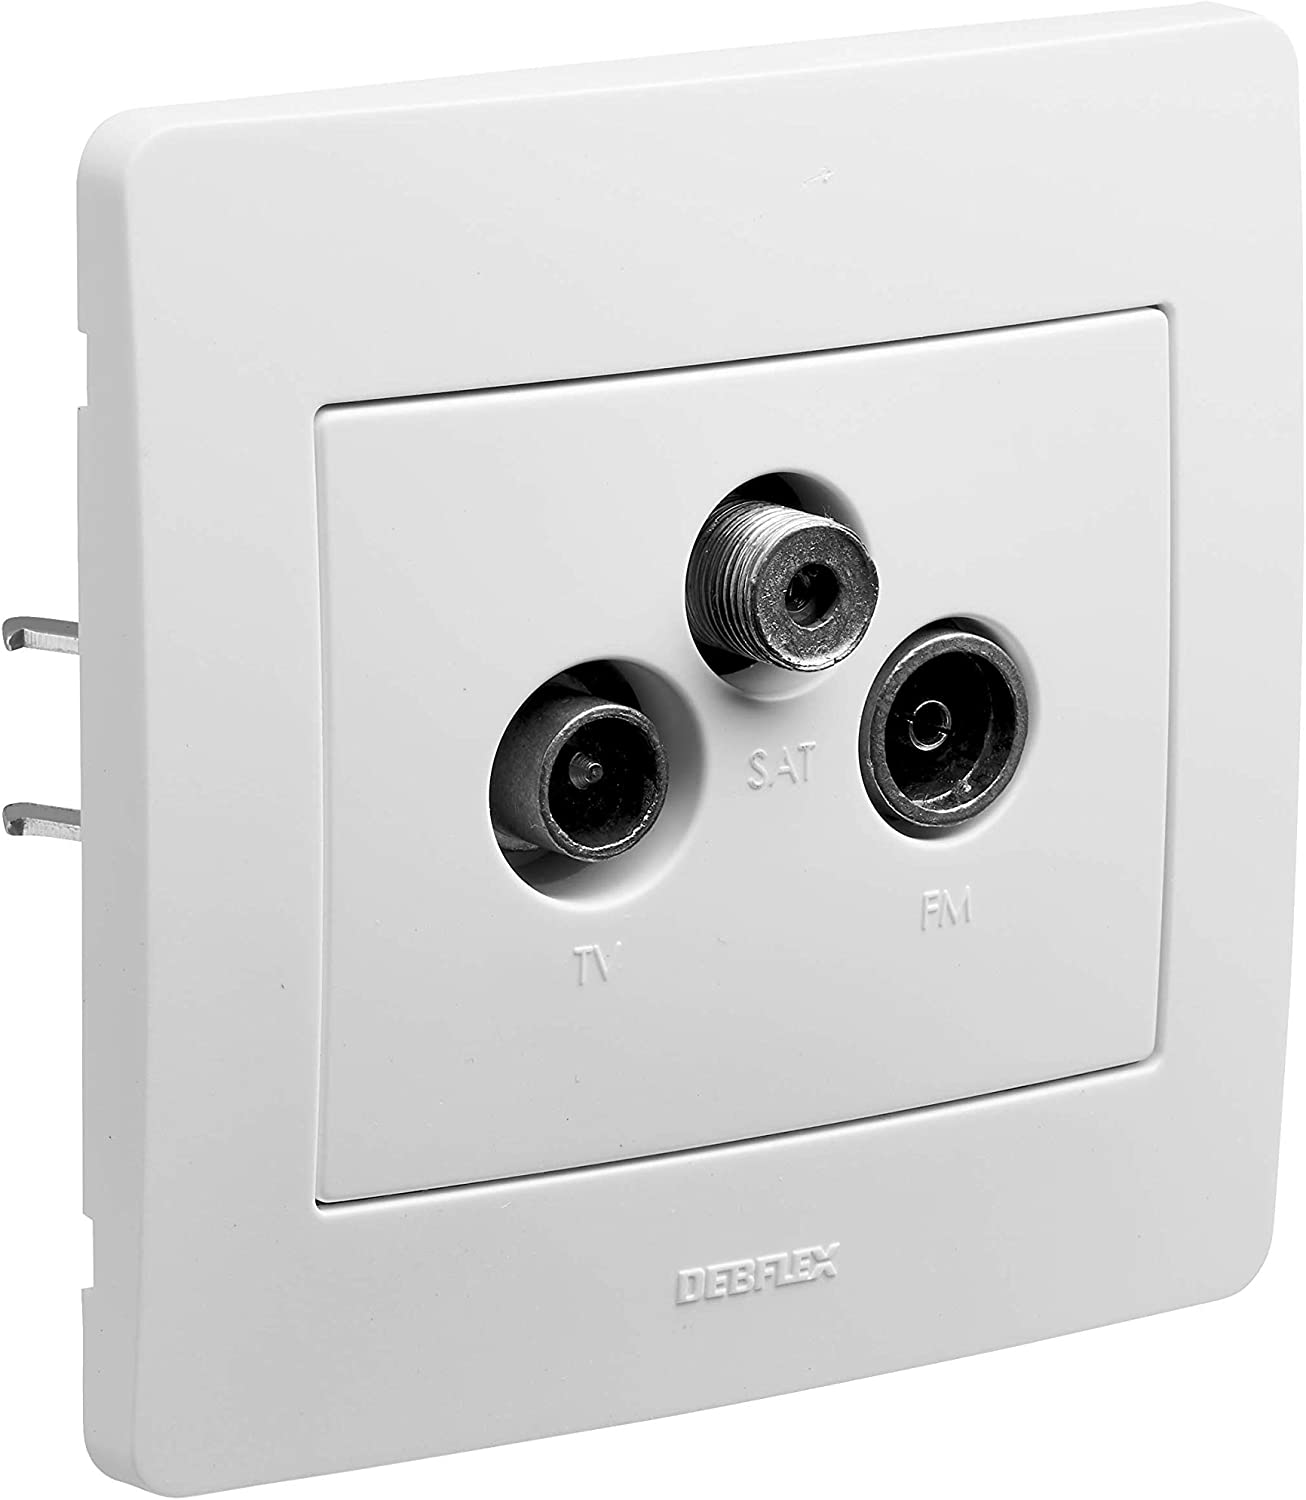 White TV, FM and satellite wall outlet